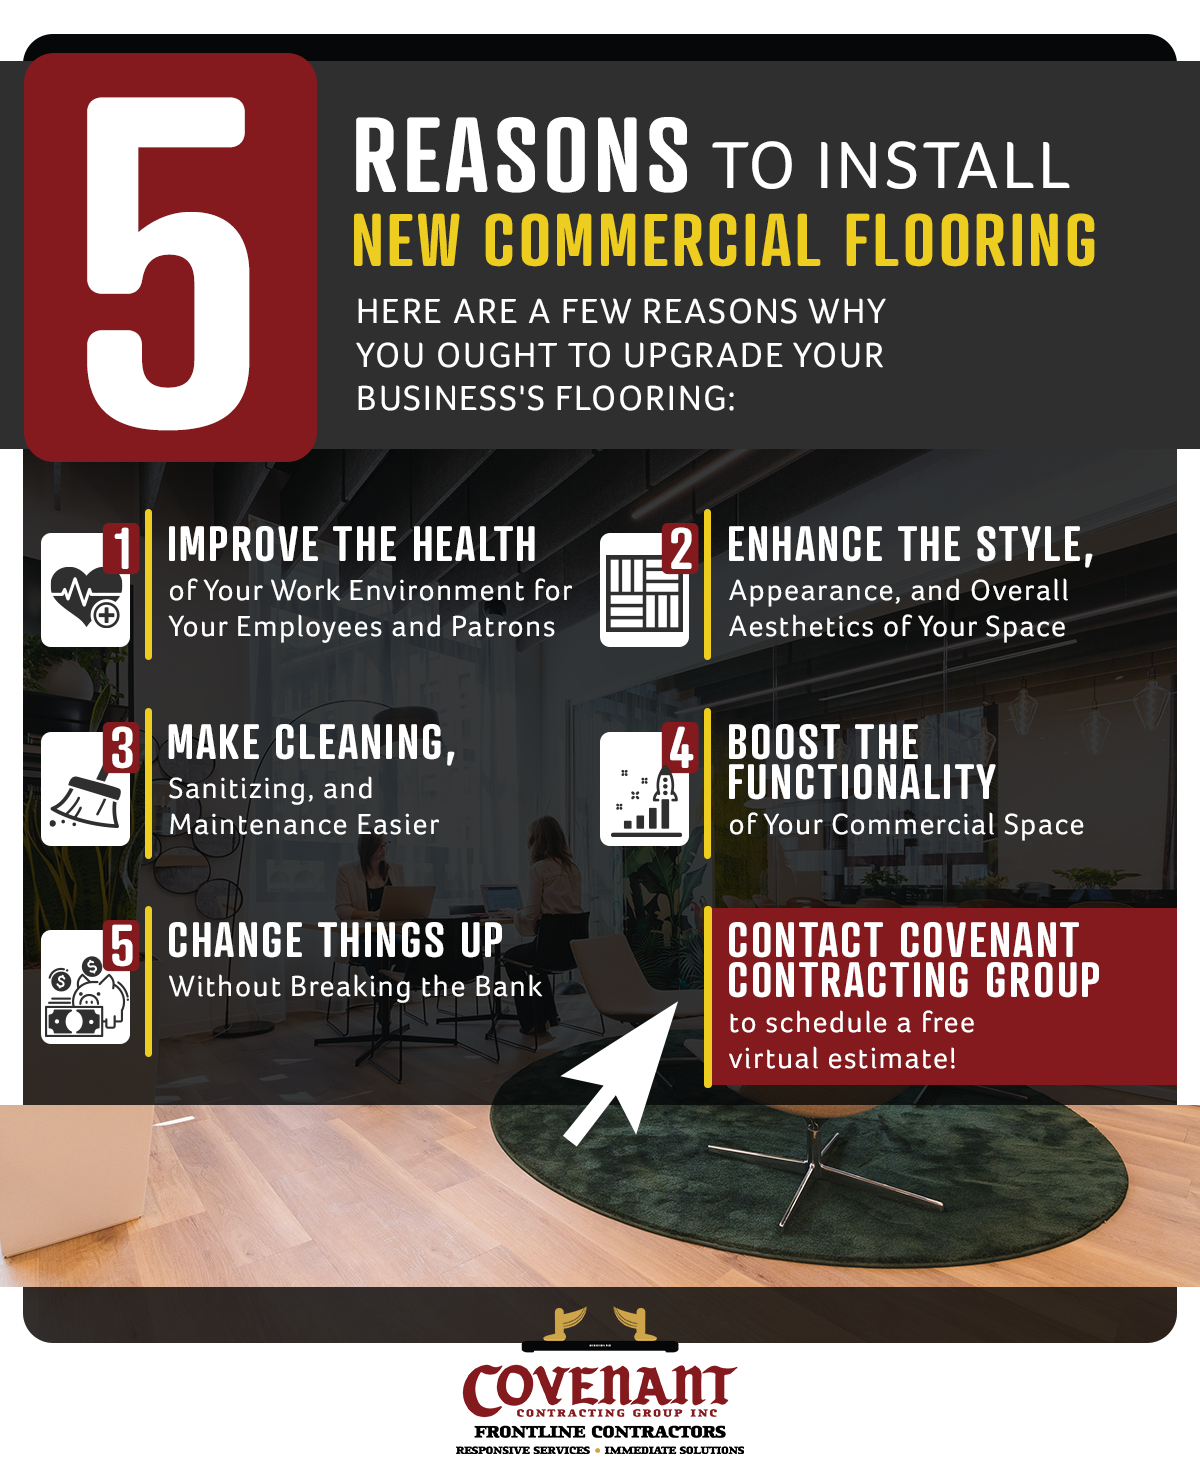 5 Reasons to Install New Commercial Flooring